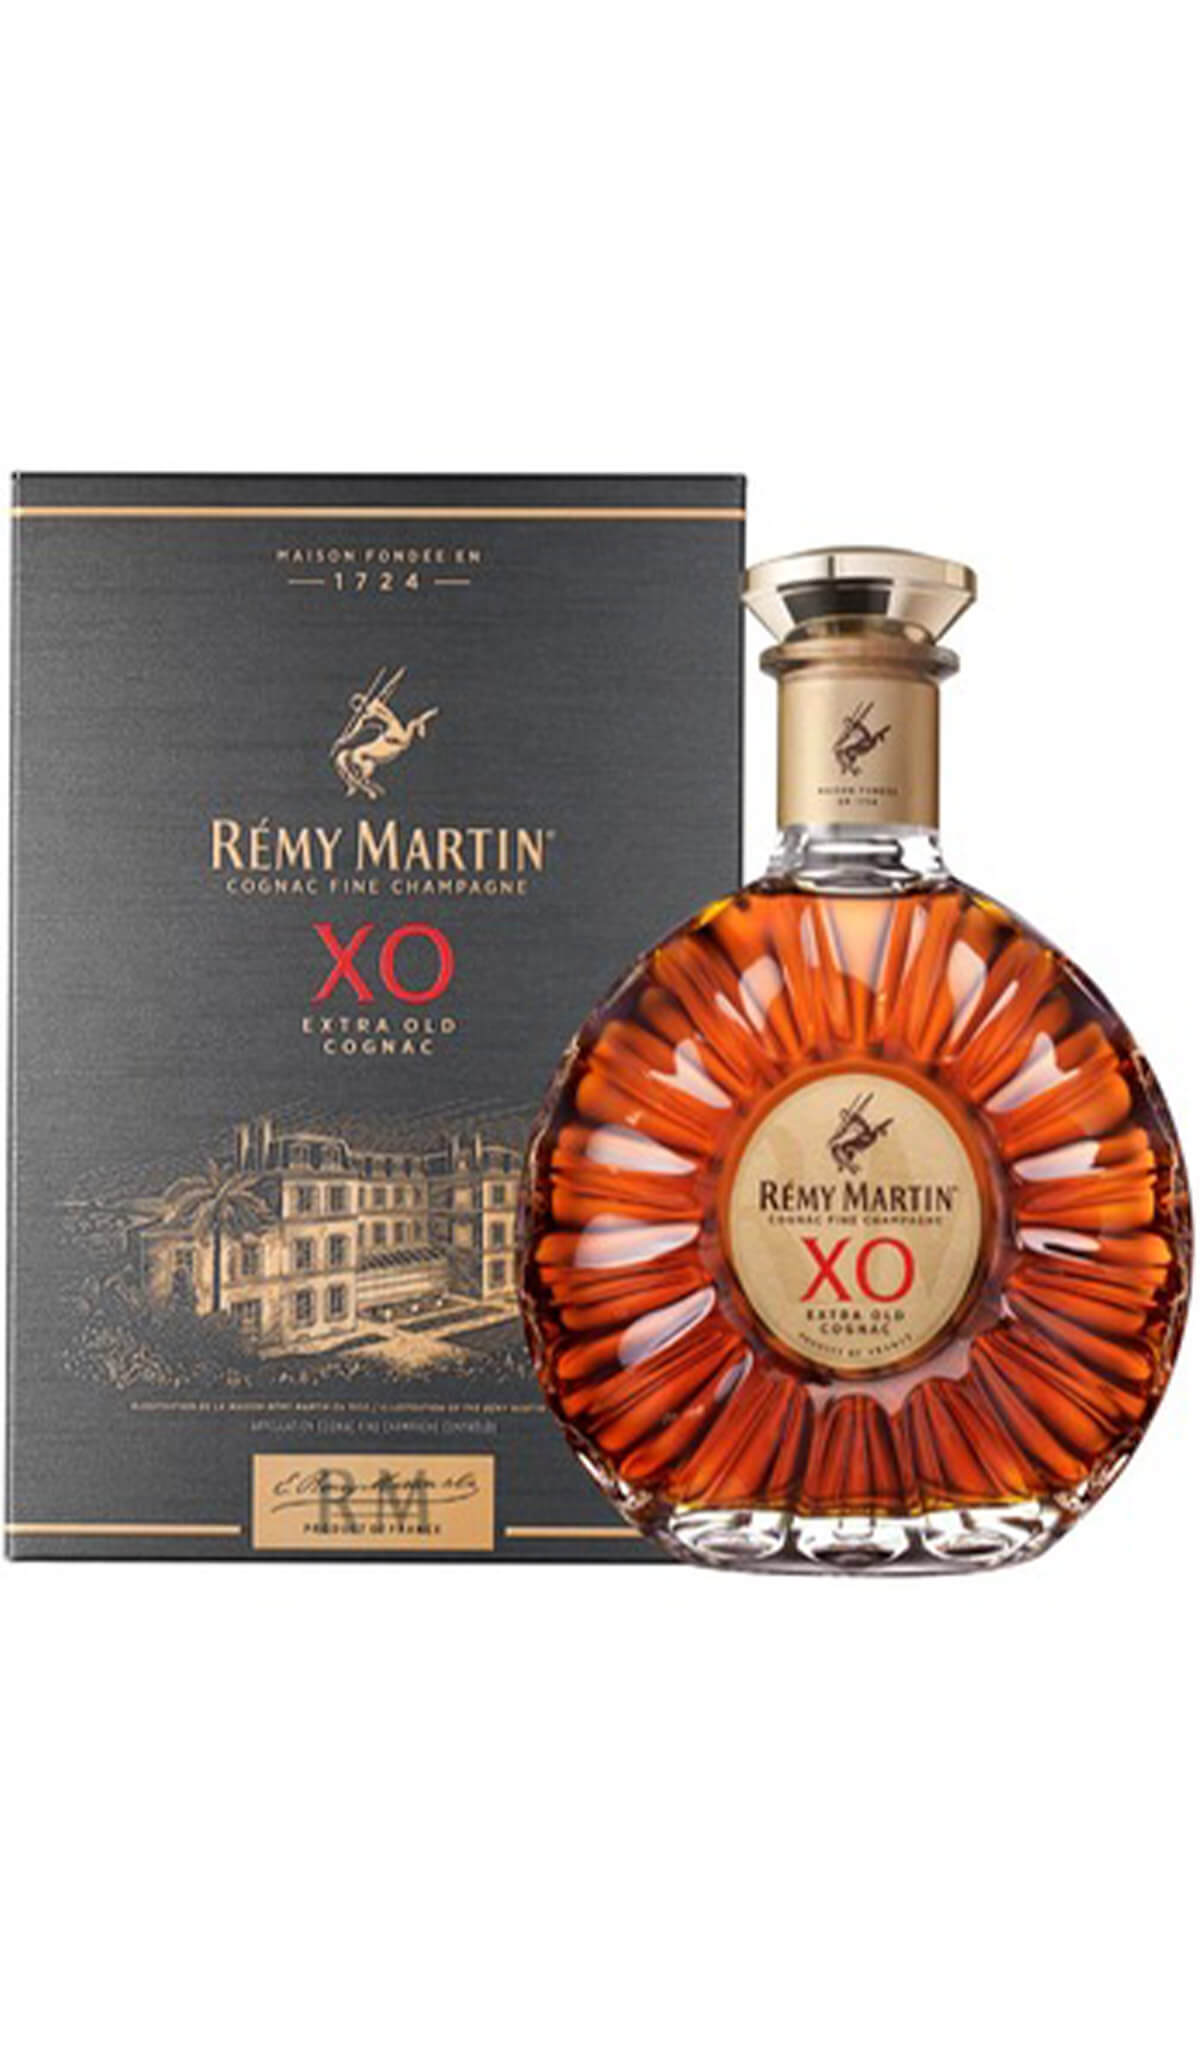 Explore the range, find out more and buy Remy Martin XO Cognac Fine Champagne 700ml available online at Wine Sellers Direct - Australia's independent liquor specialists.